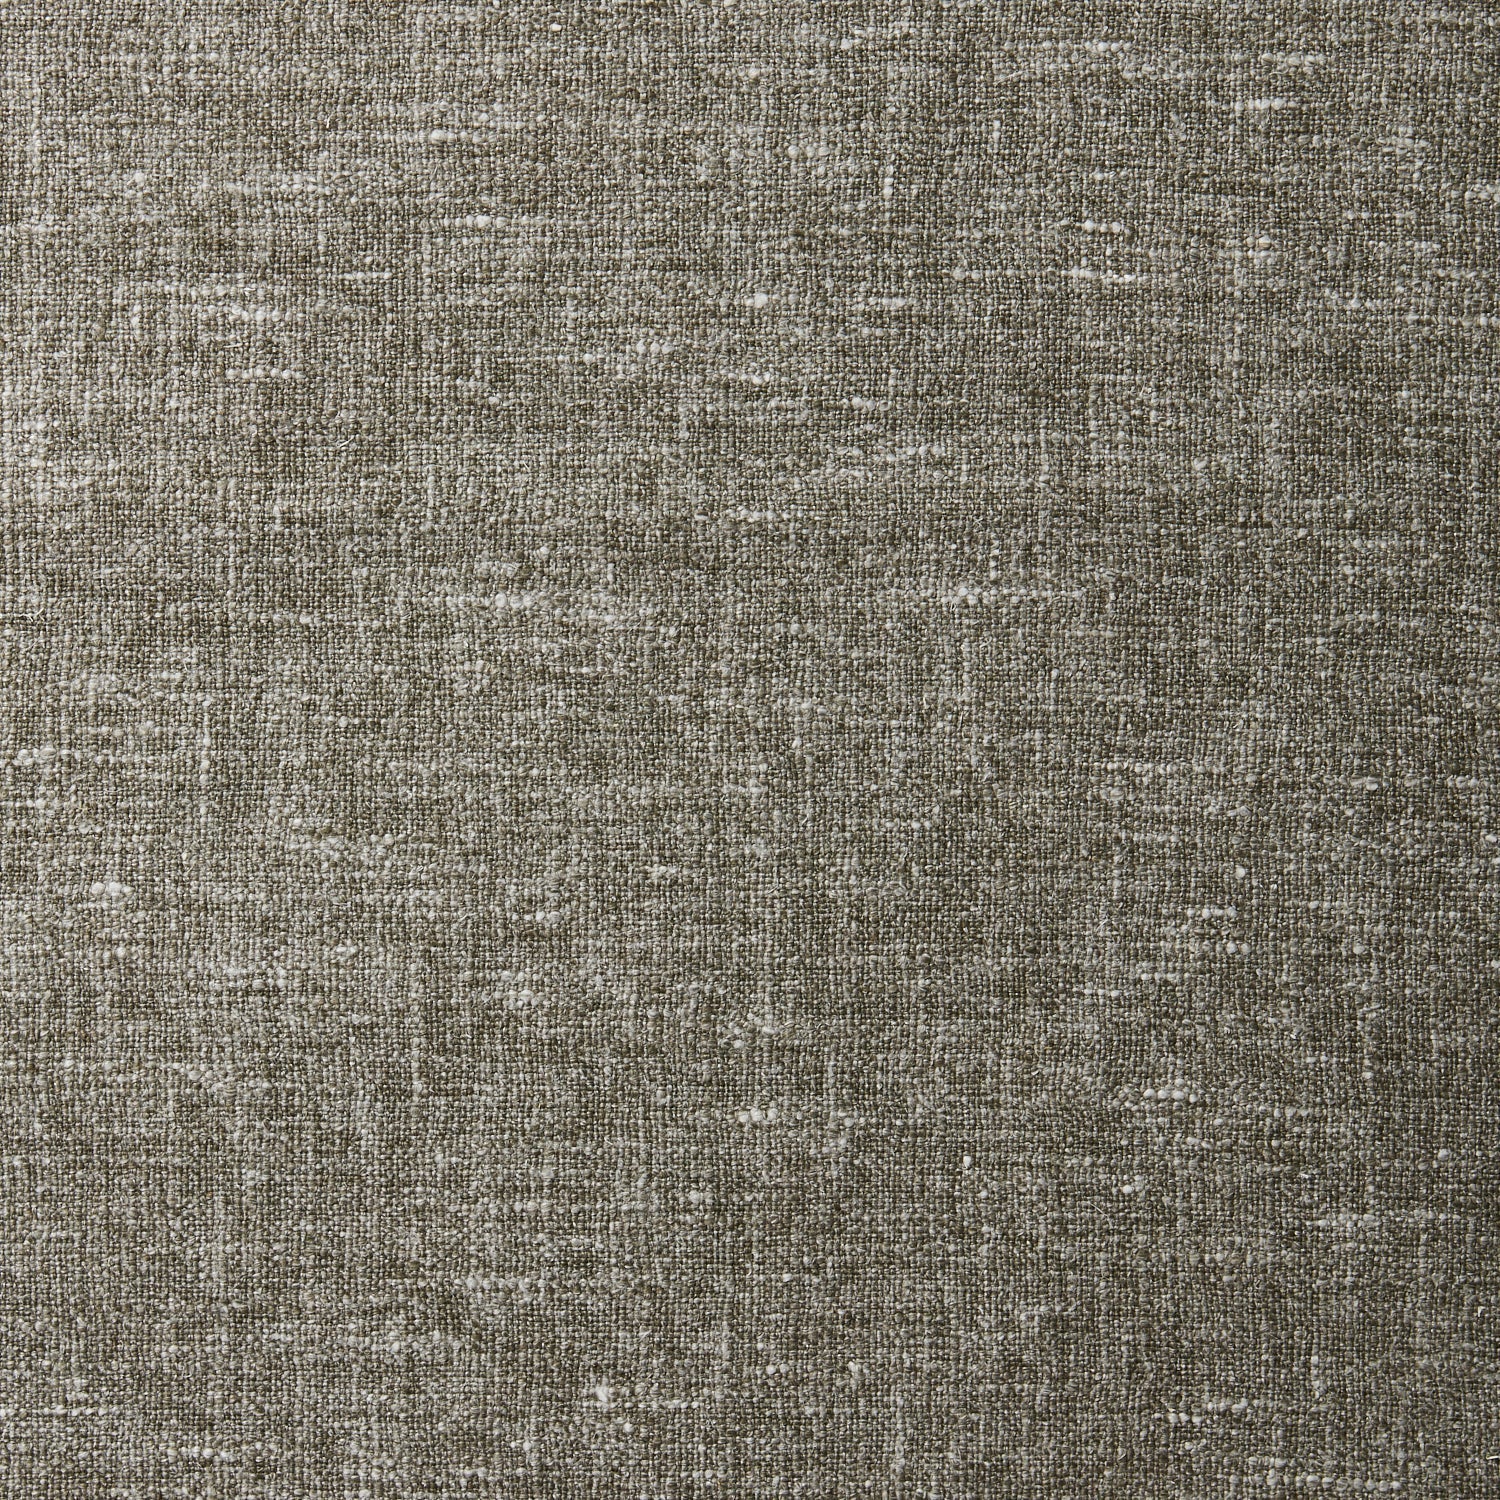 A swatch of blended linen fabric in a mottled brown color.